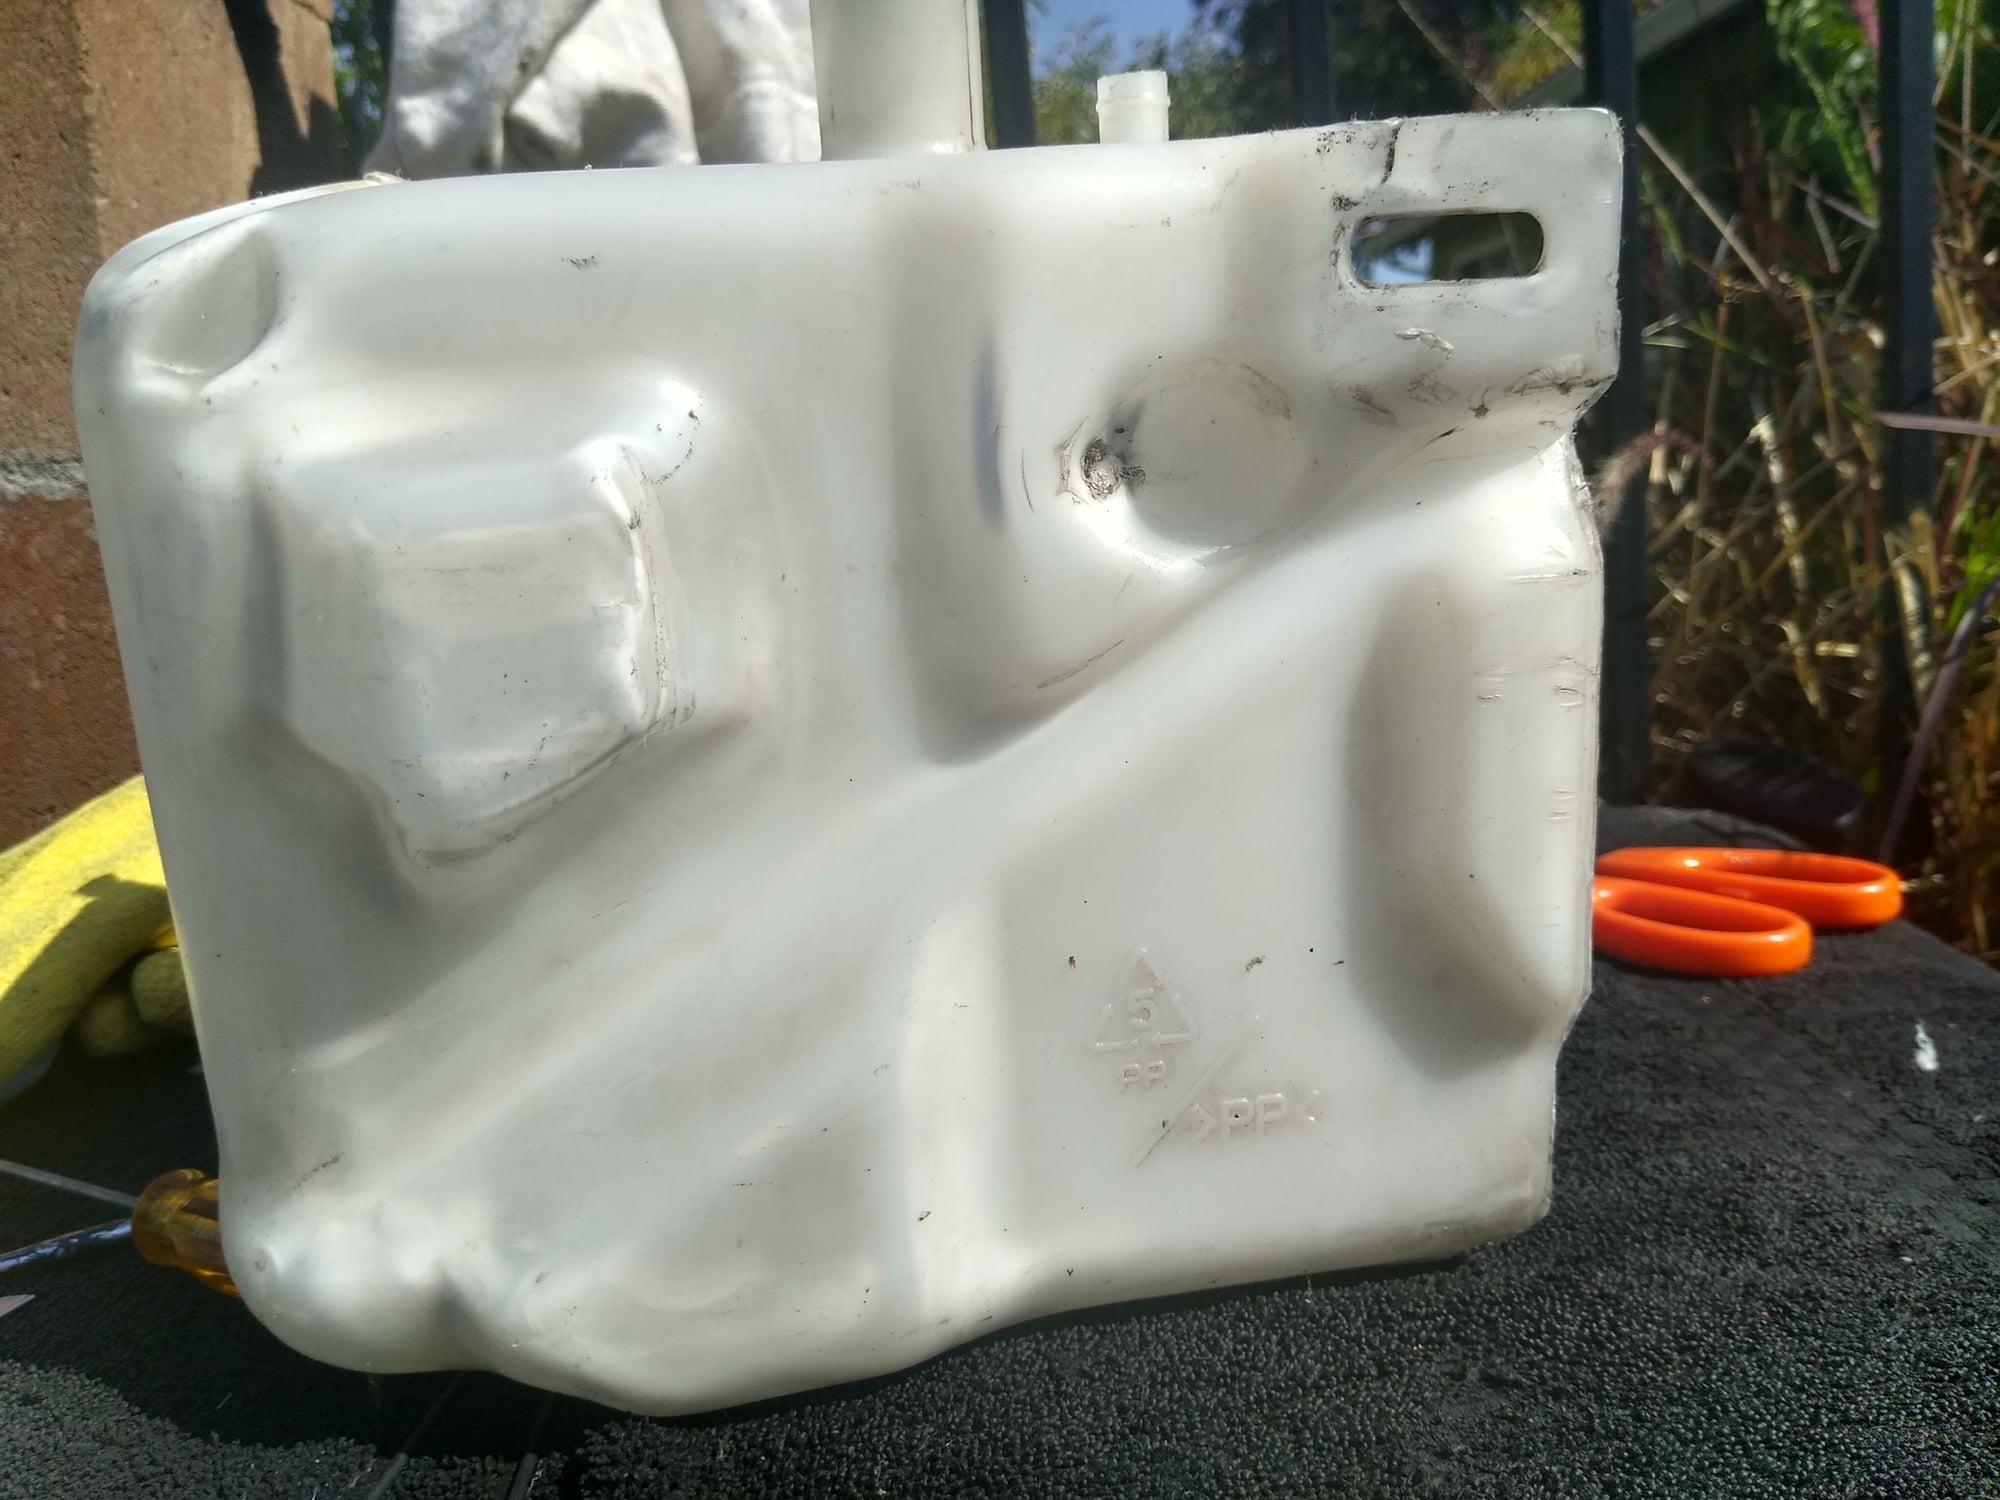 Miscellaneous - OEM - FD Windshield Water Tank g - Used - 1993 to 1995 Mazda RX-7 - San Jose, CA 95121, United States